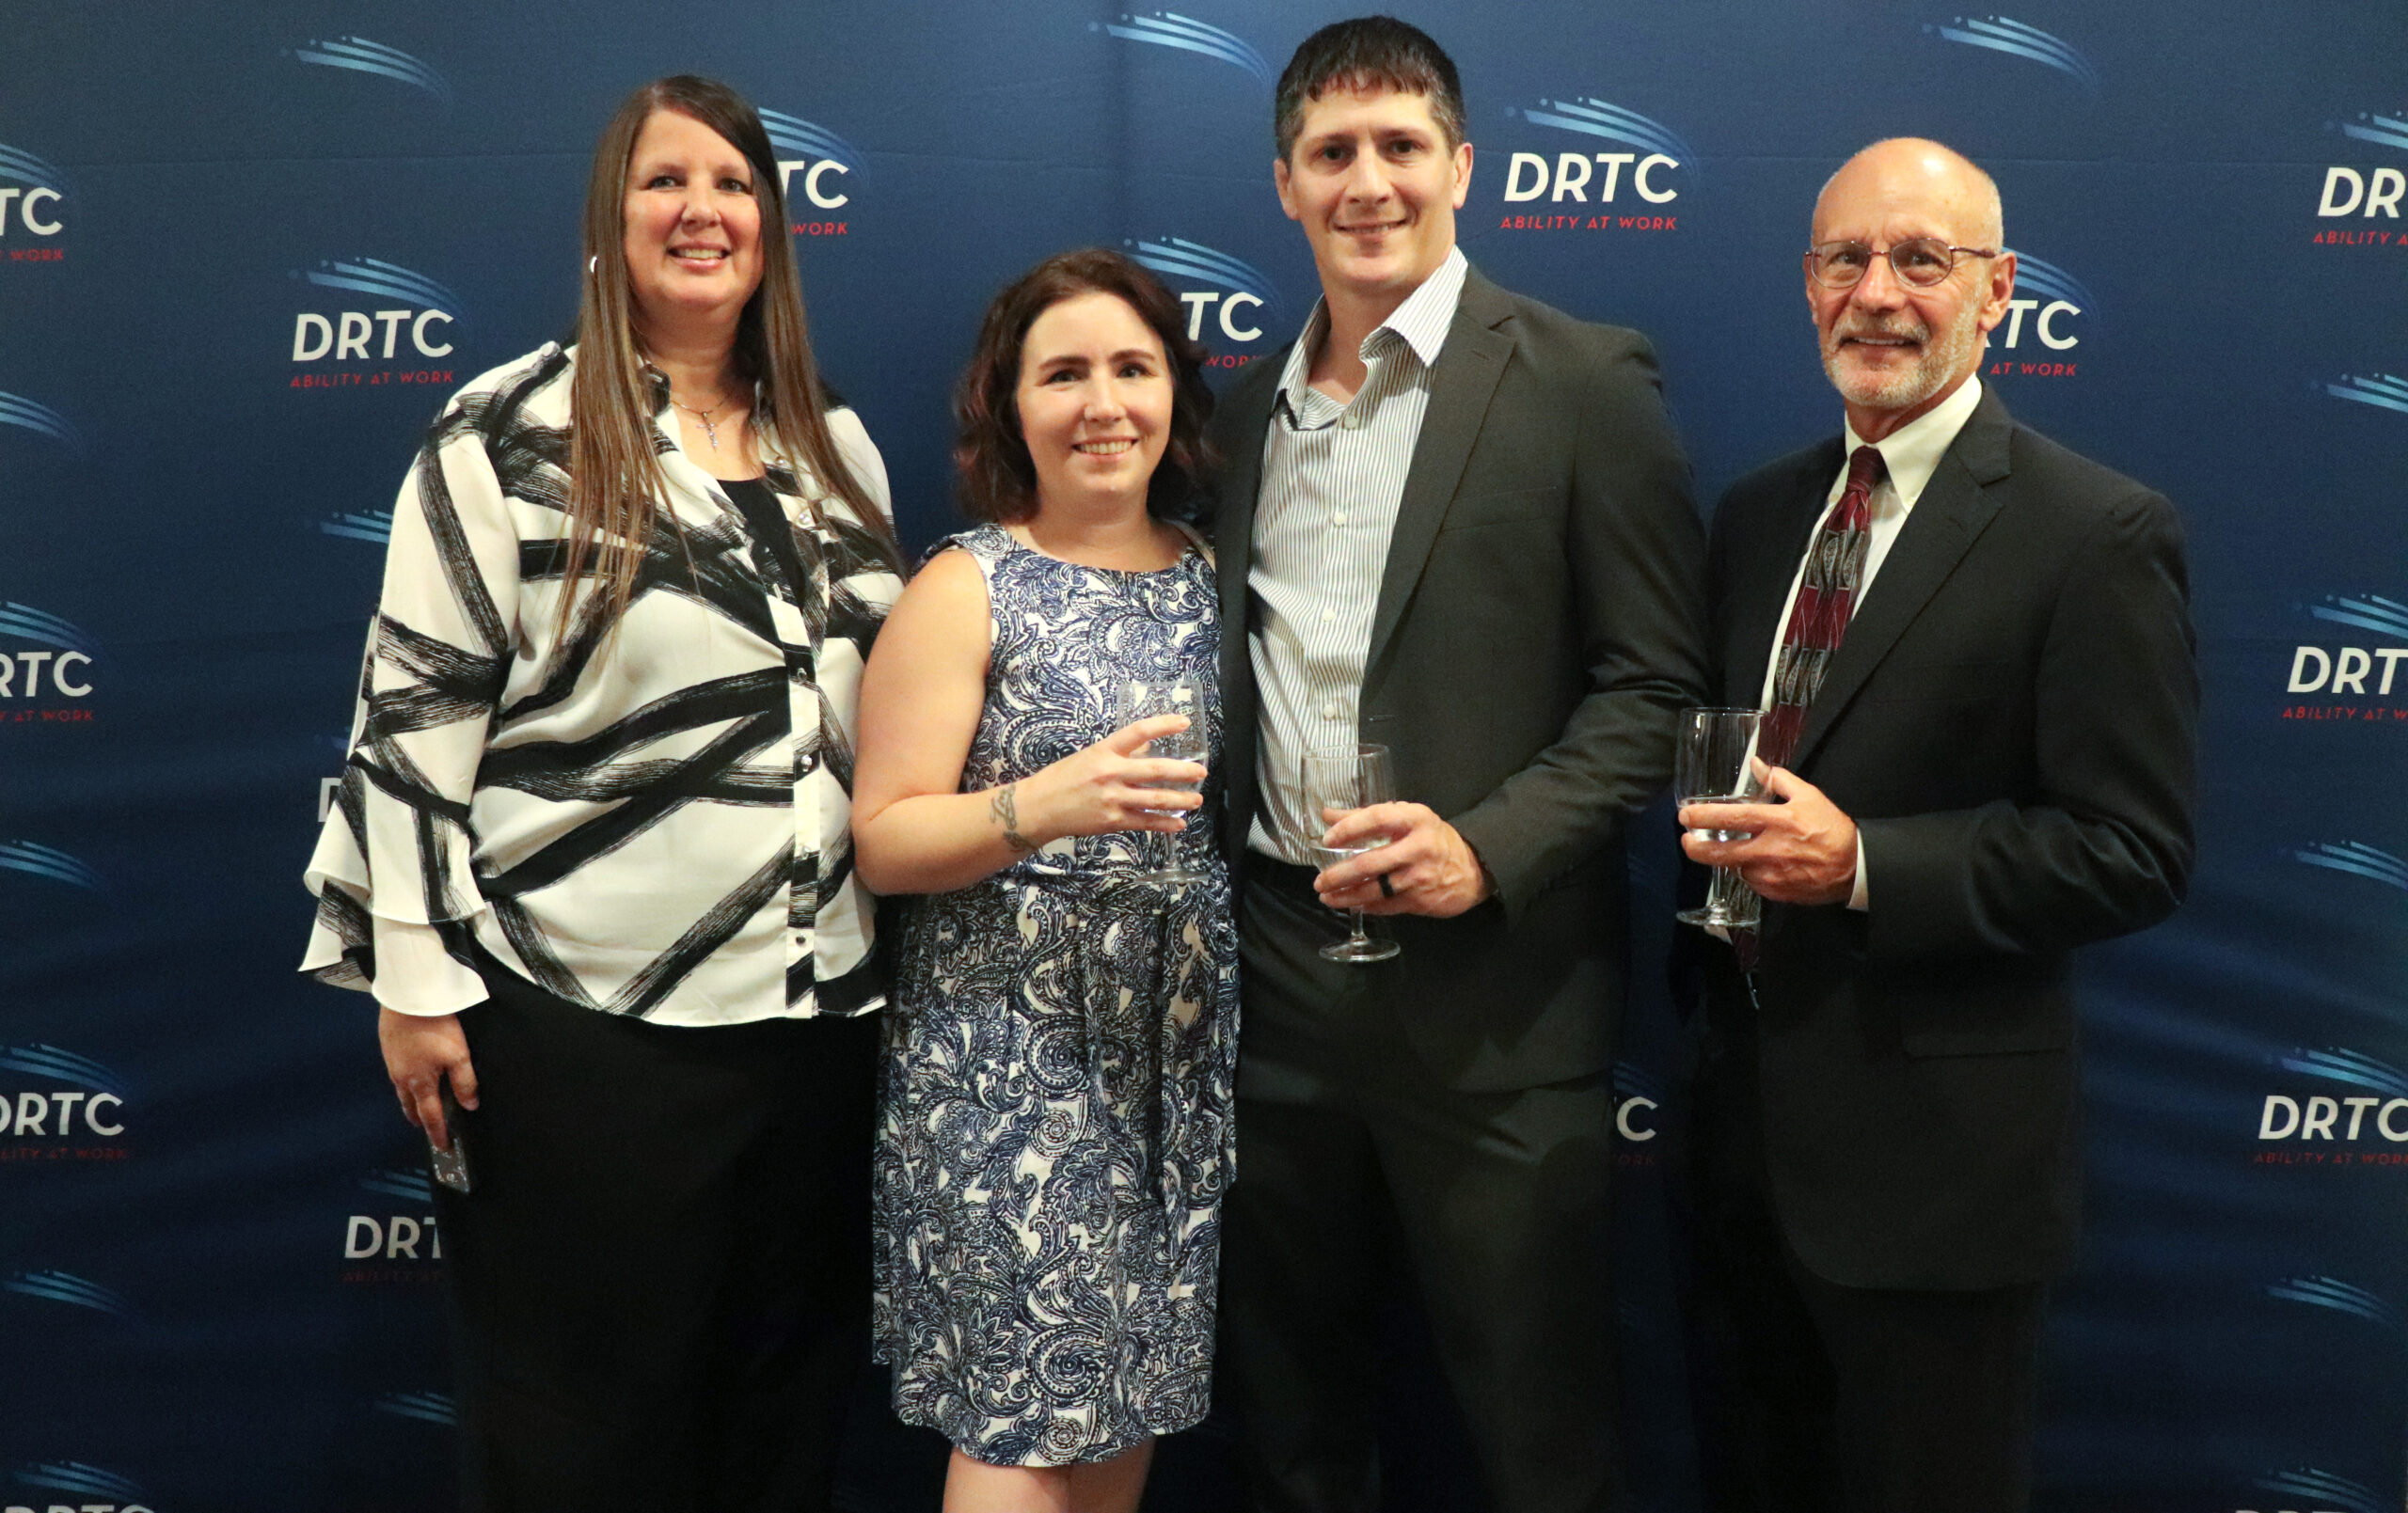 Capability Honorees from DRTC’s 70th Anniversary Gala